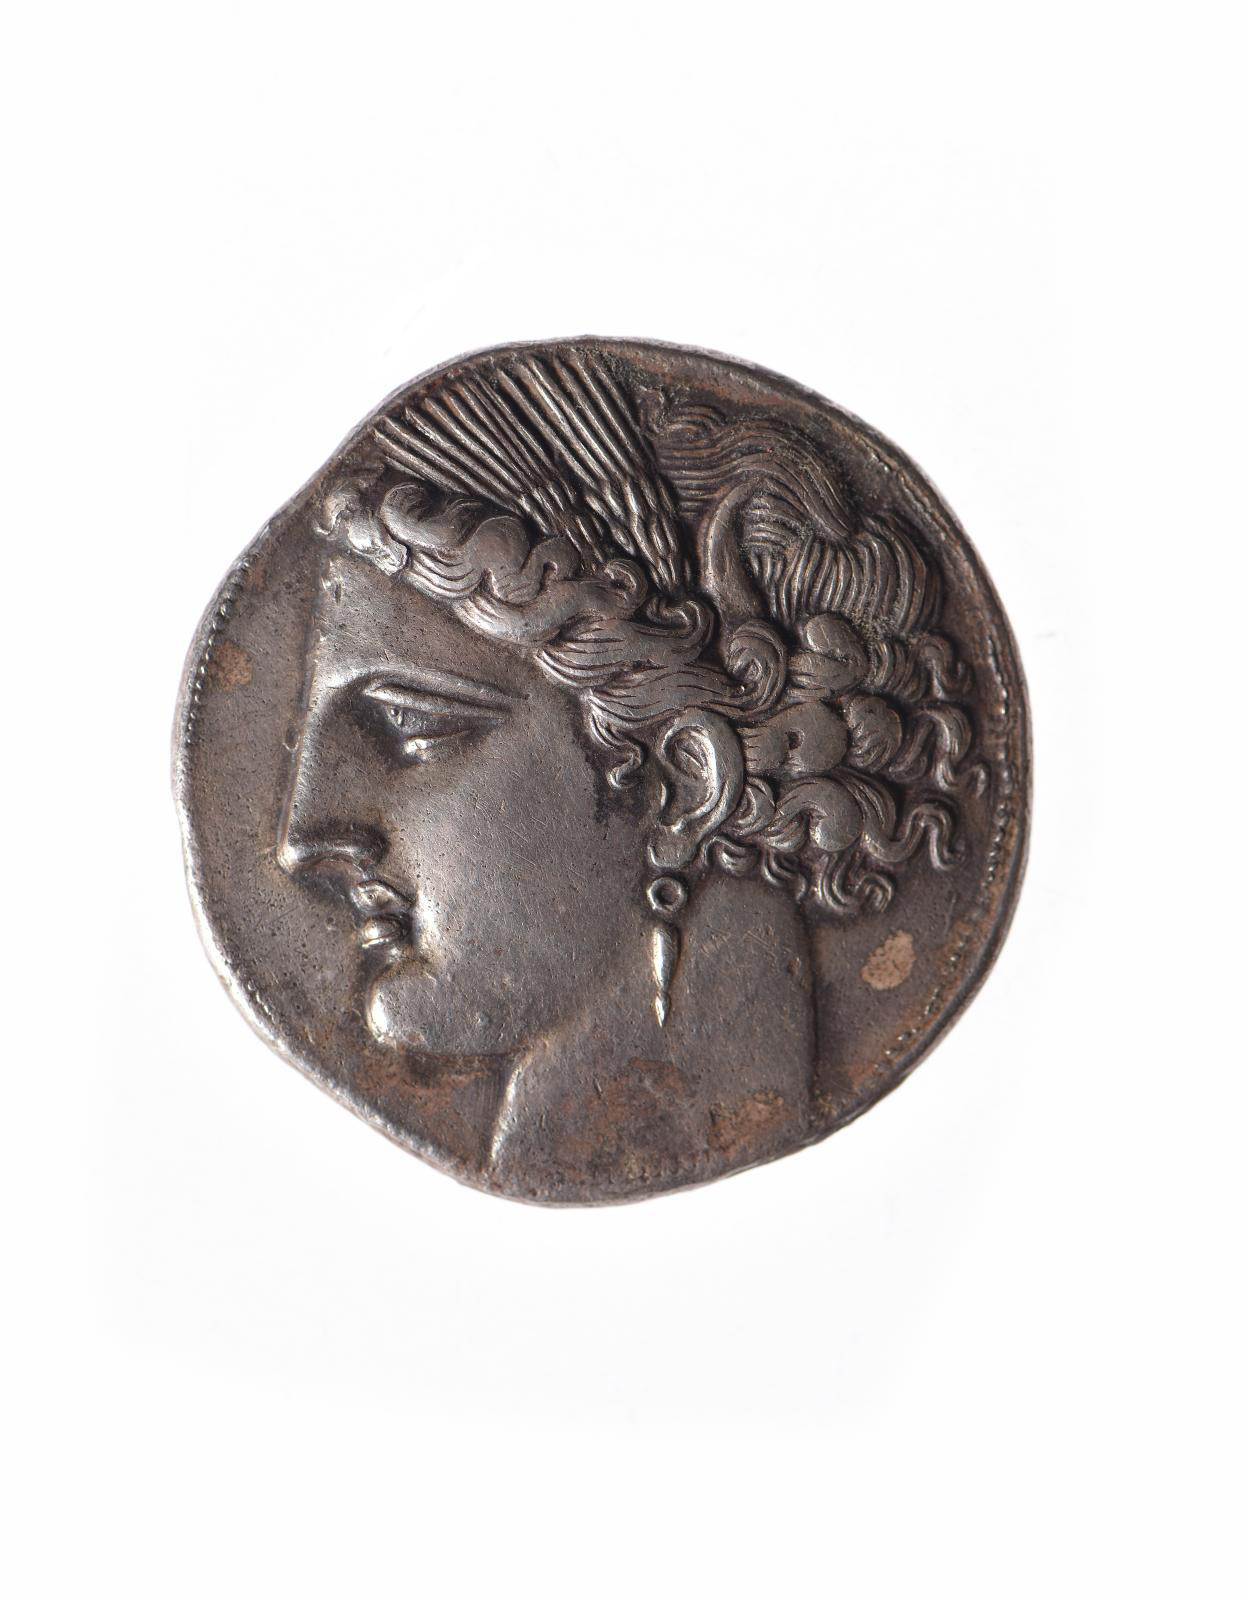 When a Coin from Carthage Depicts Persephone